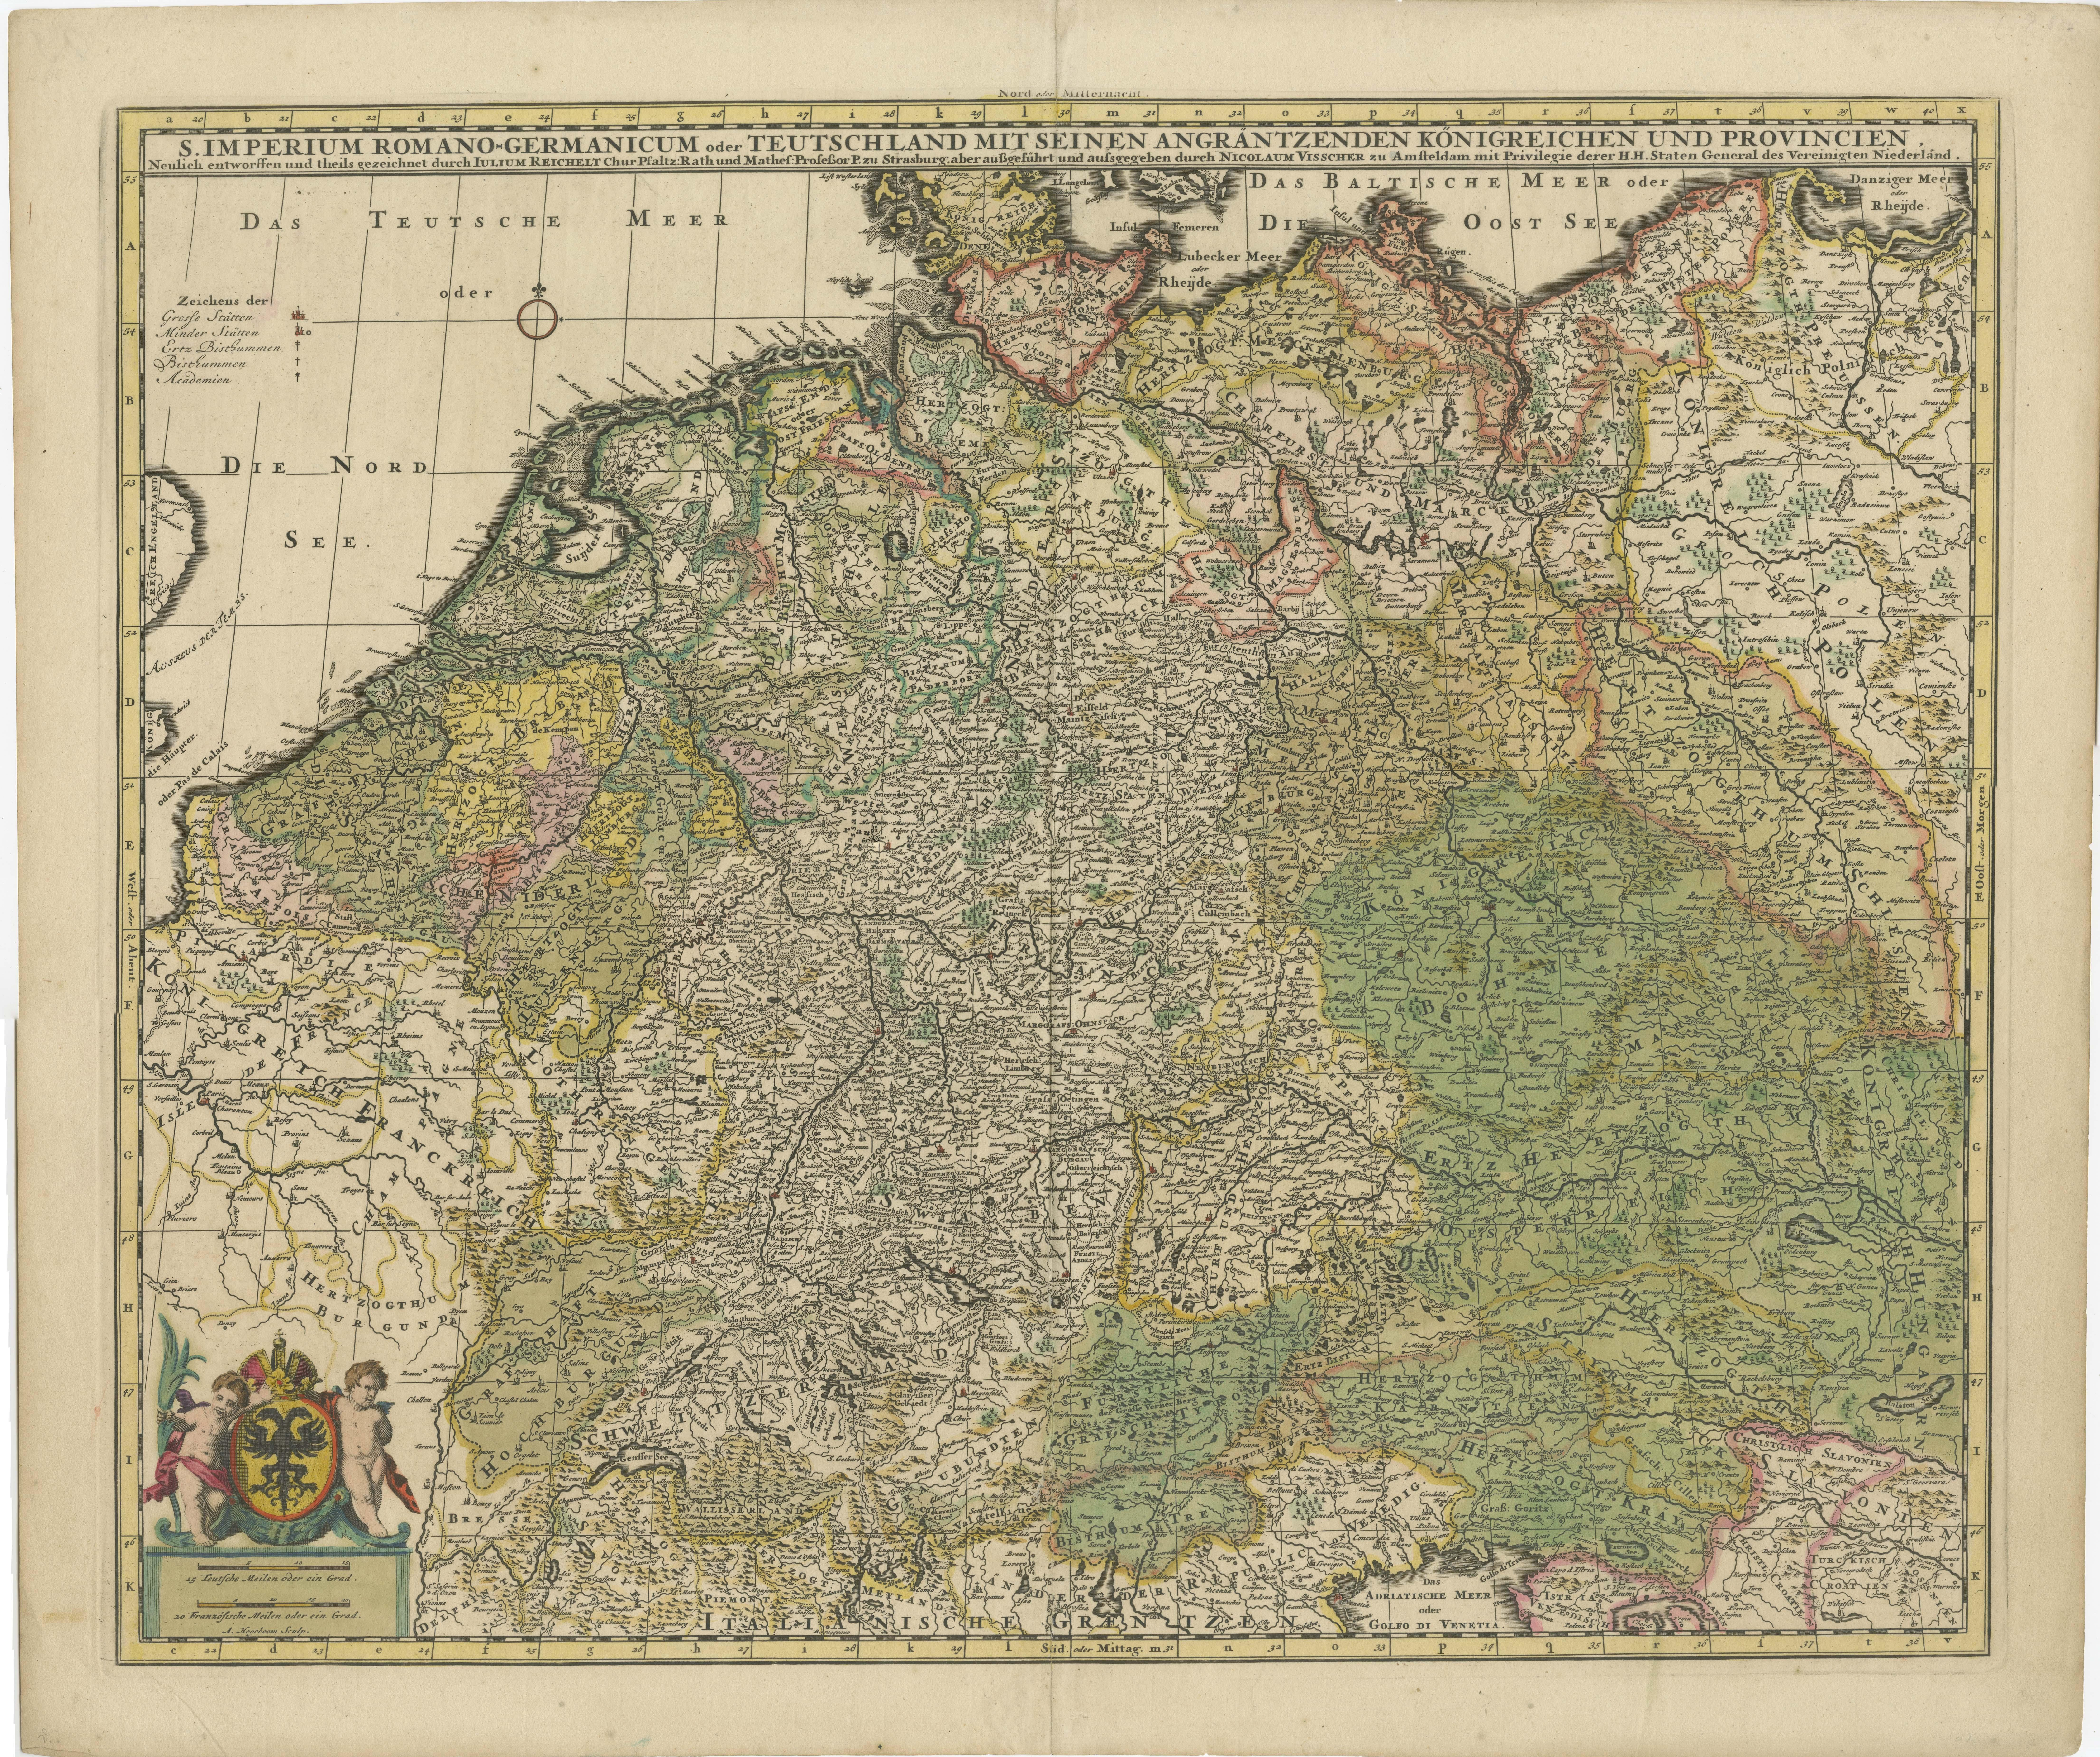 Antique map titled 'S. Imperium Romano-Germanicum oder Teutschland mit seinen angrantzenden Königreichen und Provincien'. Original antique map of Germany covering the central part of Europe with Germany in the center and the Netherlands in west.